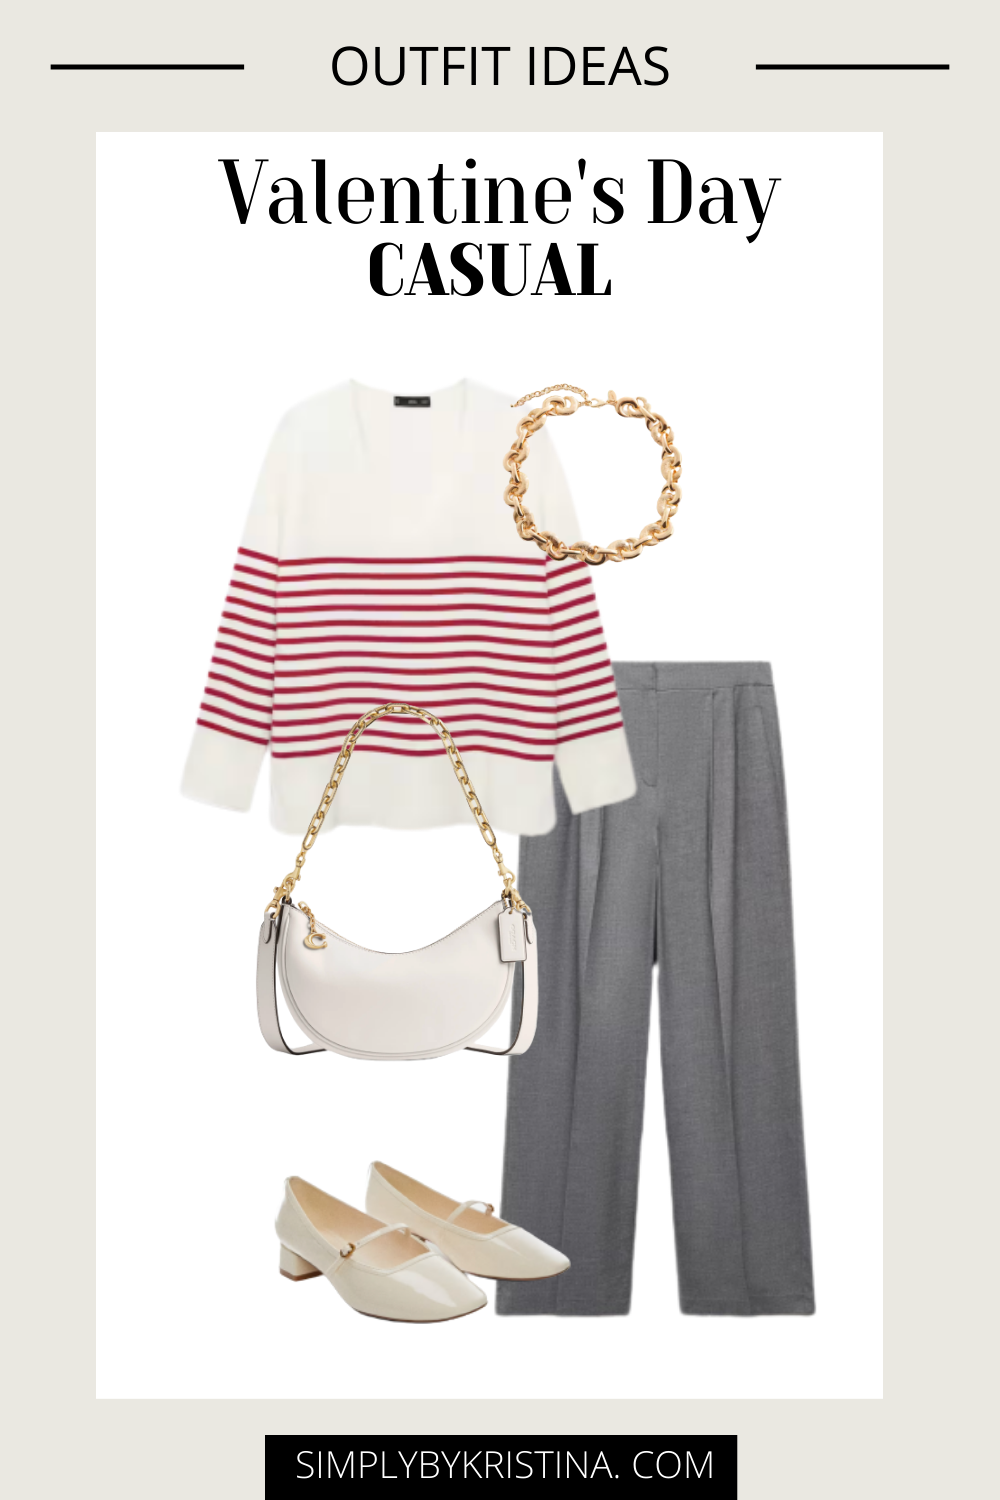 Chic Yet Casual Valentine's Day Outfit Ideas